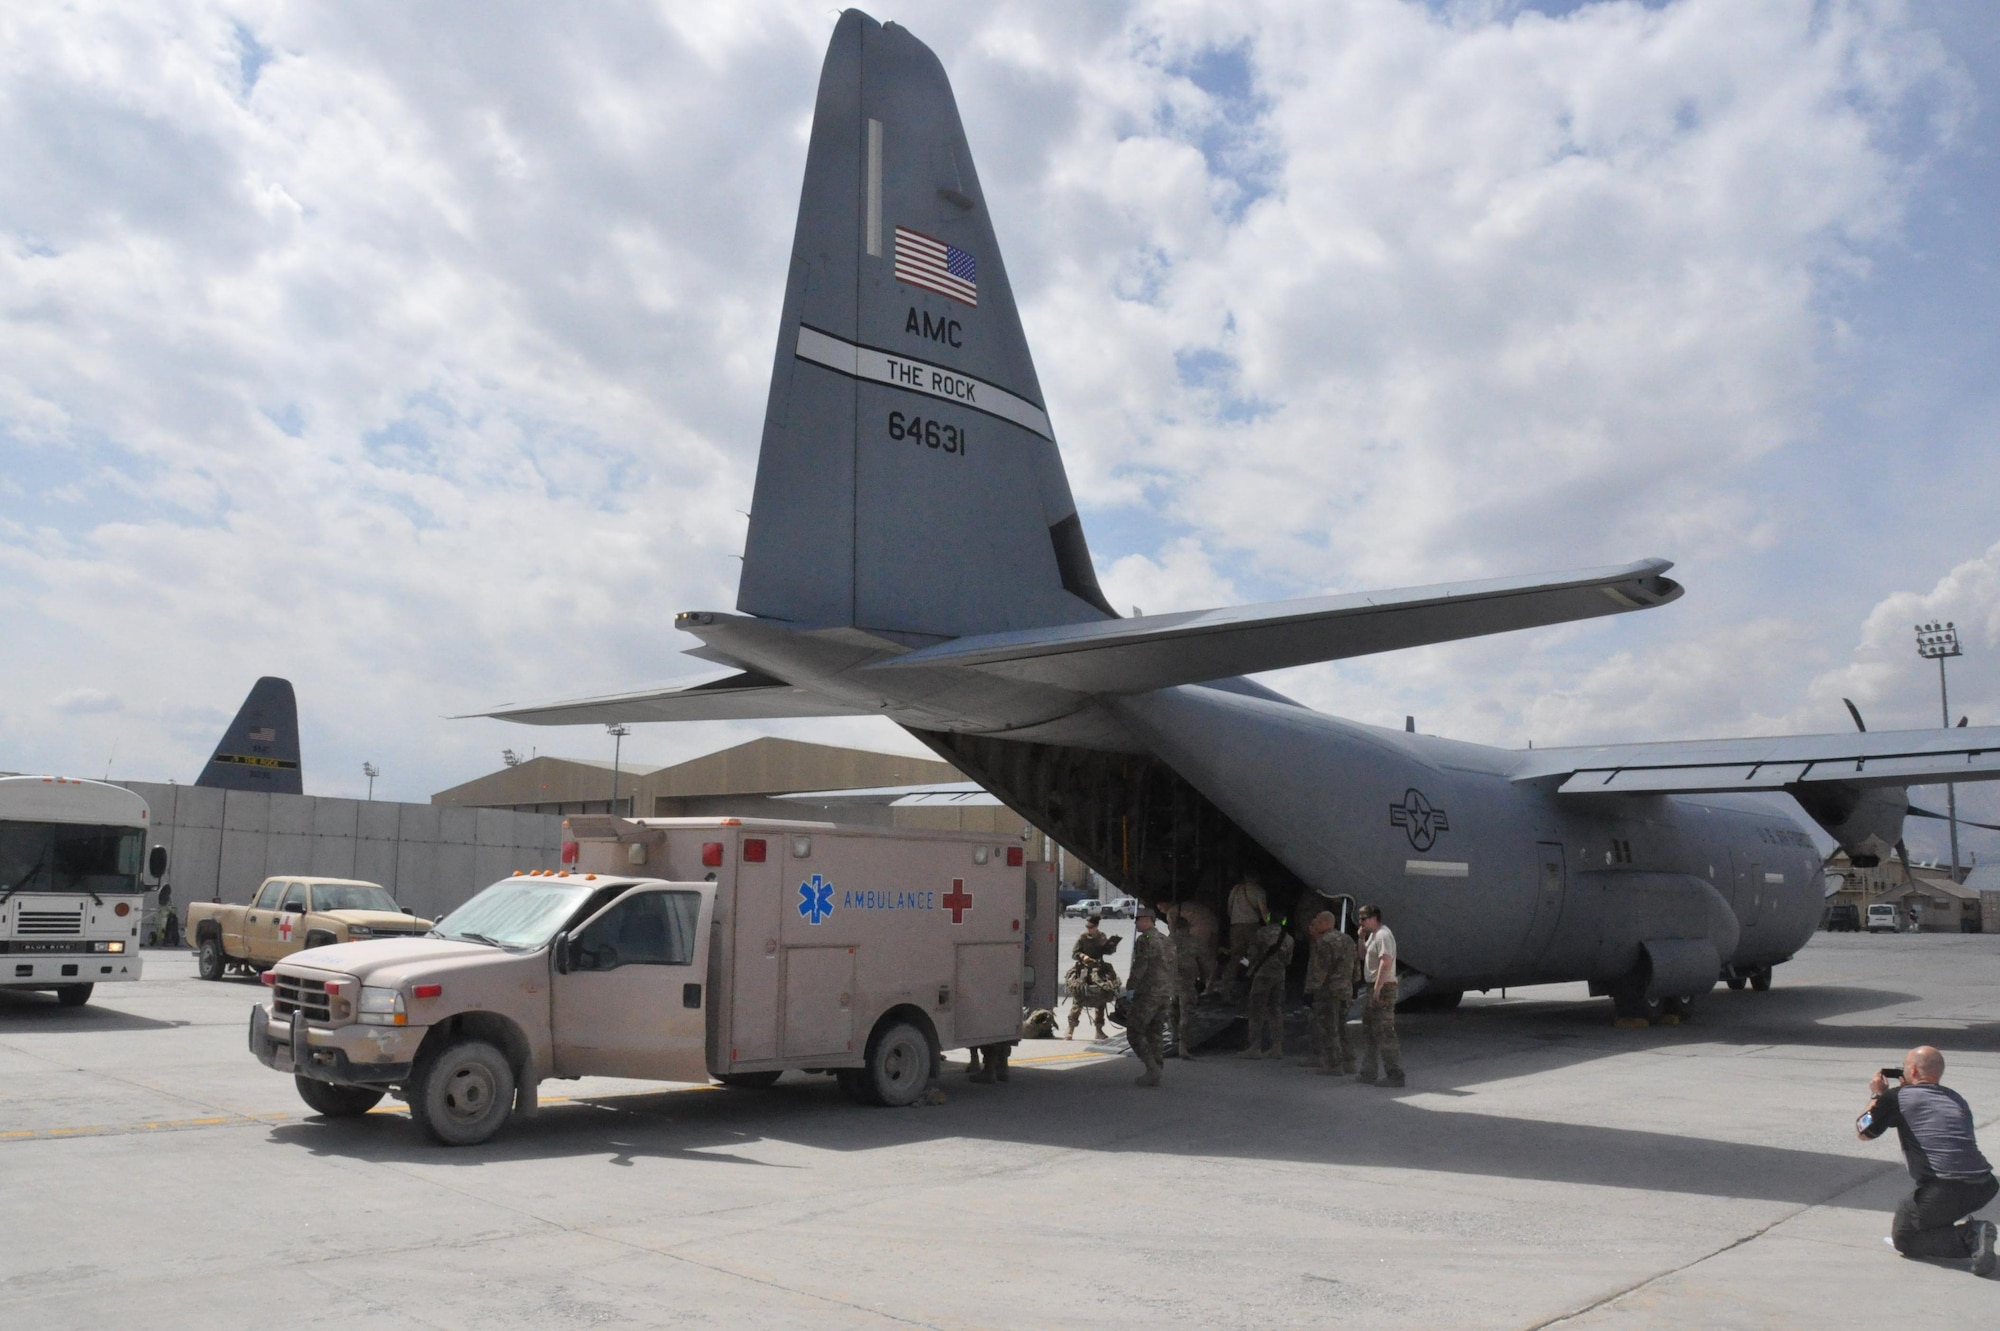 A patient is offloaded from a C-130J with the 772nd Expeditionary Airlift Squadron at Bagram Airfield, Afghanistan, April 7, 2013. The aircraft is met by an ambulance which will take the patient to Craig Joint Theater Hospital. This is the same procedure that was used during an Aeromedical Evacuation mission to move a critically wounded combat controller from Mazar-e Sharif, in northern Afghanistan, to more advanced medical care at the hospital at Bagram in late March. (U.S. Air Force photo/Capt. Tristan Hinderliter)